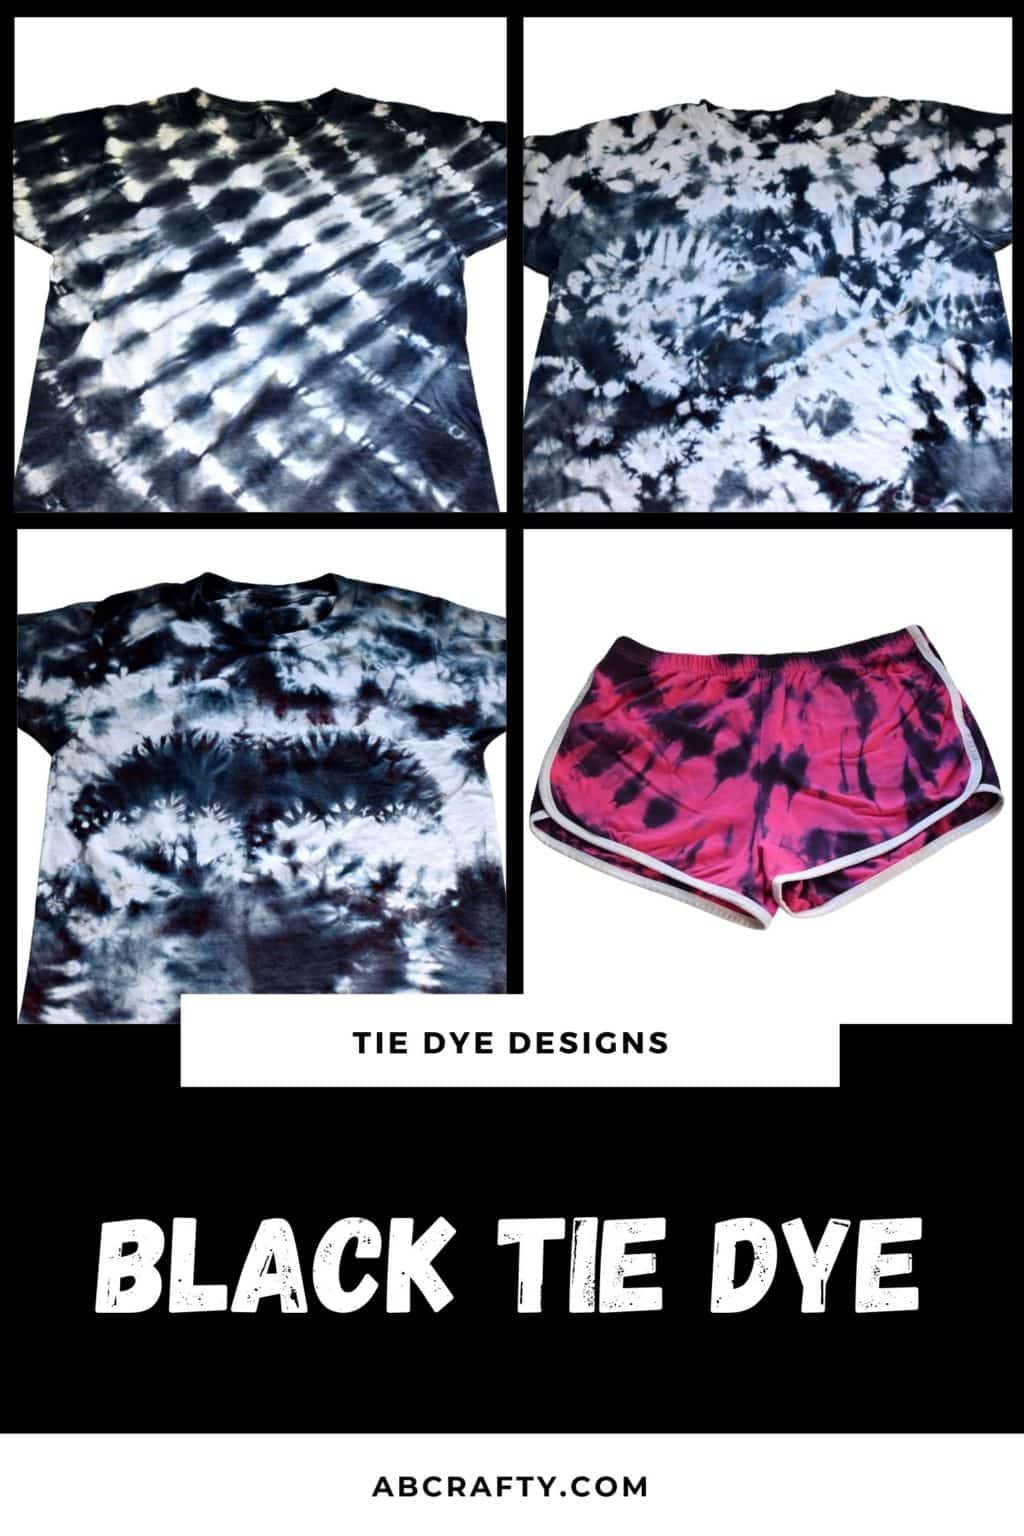 Black Tie Dye - 4 Black Tie Dye Designs for Shirts and Clothes